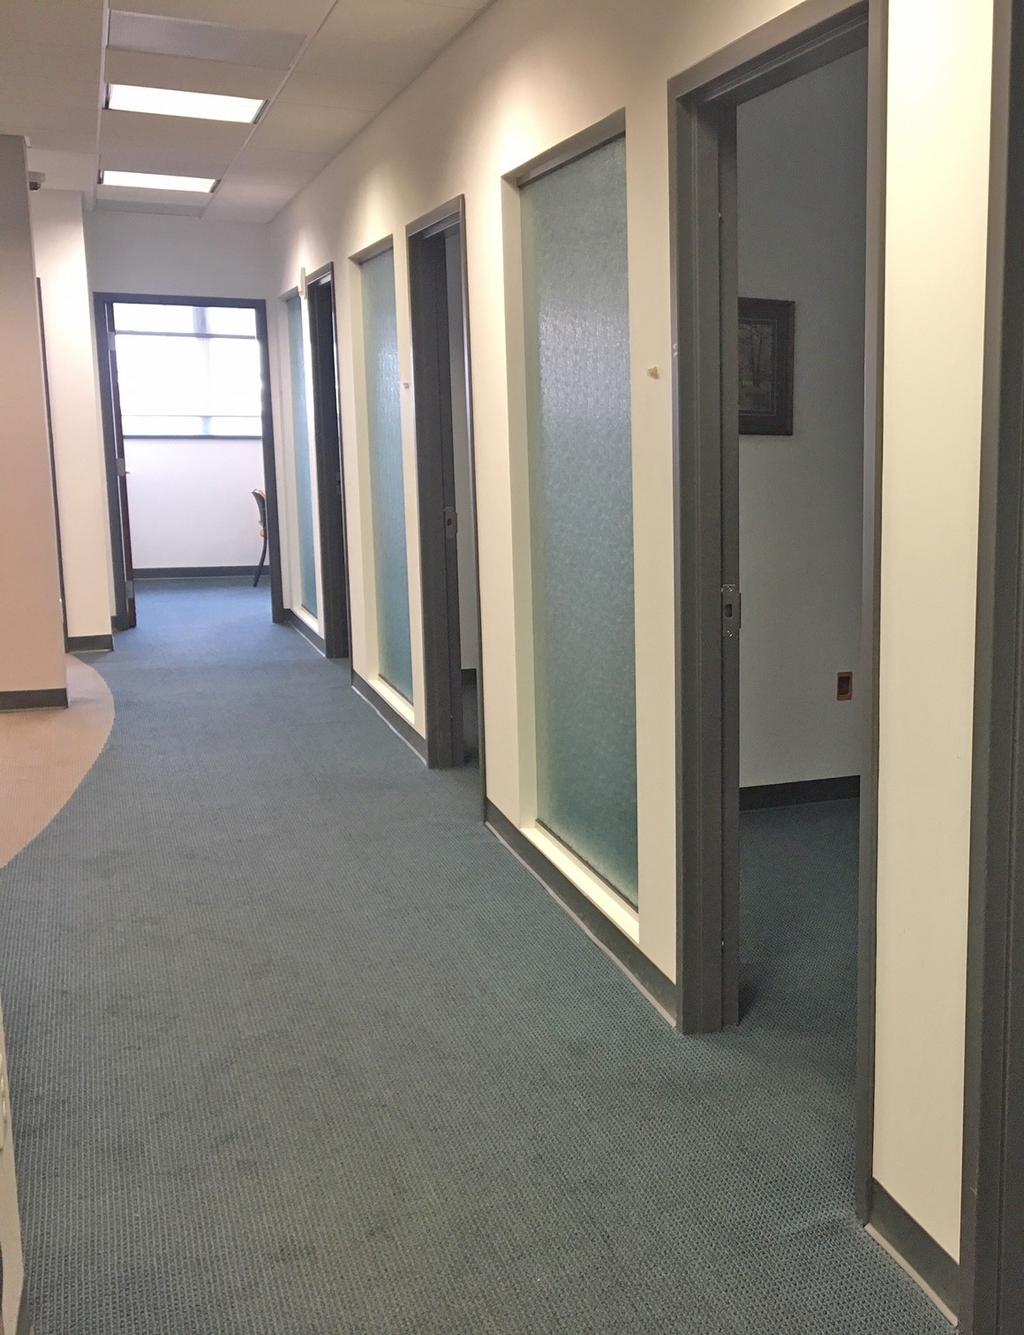 Market Street 1 st Floor - +/- 4,607 SF 2 nd Floor - +/- 6,774 SF 1 st & 2 nd Floor can be leased together Abundant Natural Light Elevator Serviced Building Parking Available On-Site